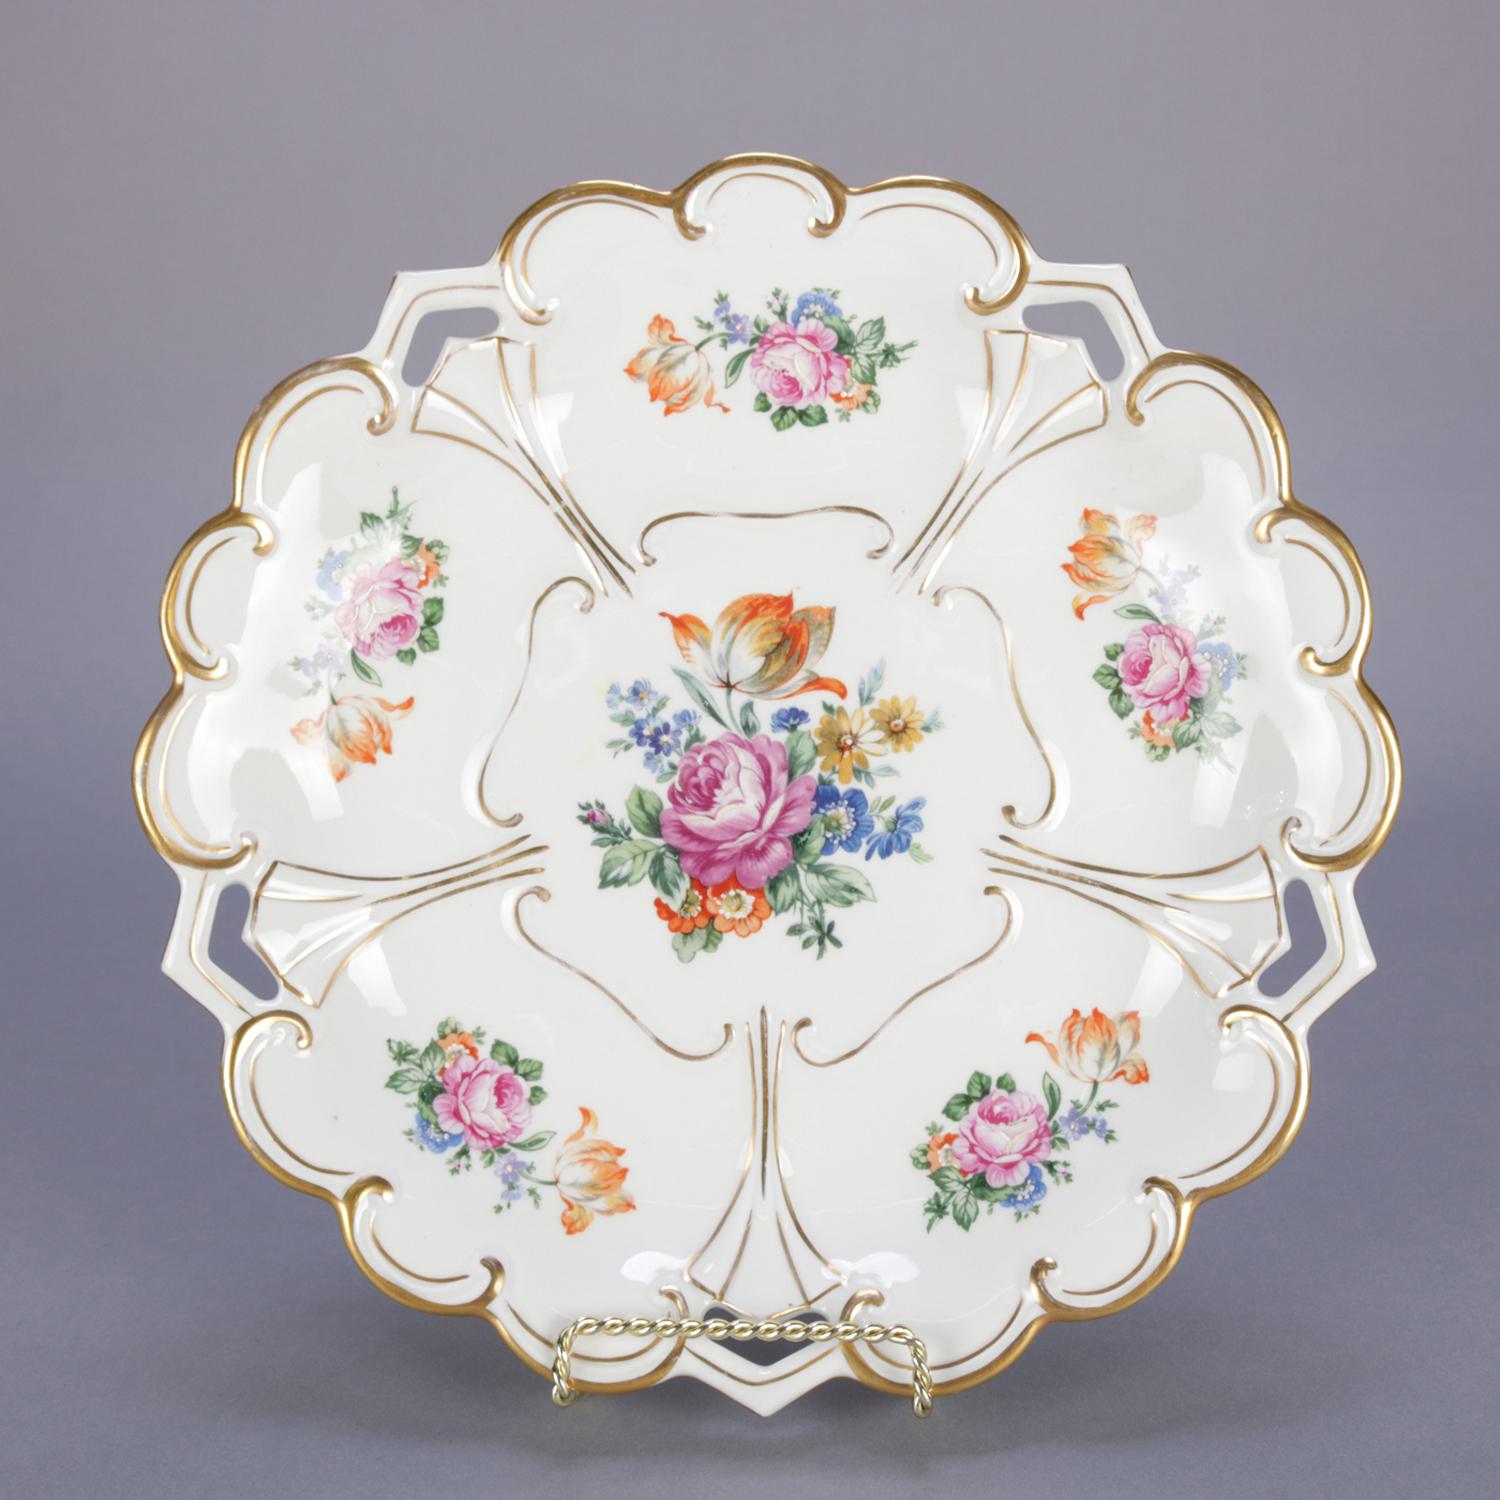 An antique German hand enameled porcelain charger by Henneberg-Porzellan features stylized flower form with floral reserves and gilt highlighting throughout, en verso maker stamp and numbered, circa 1920.


Measures: 1.5